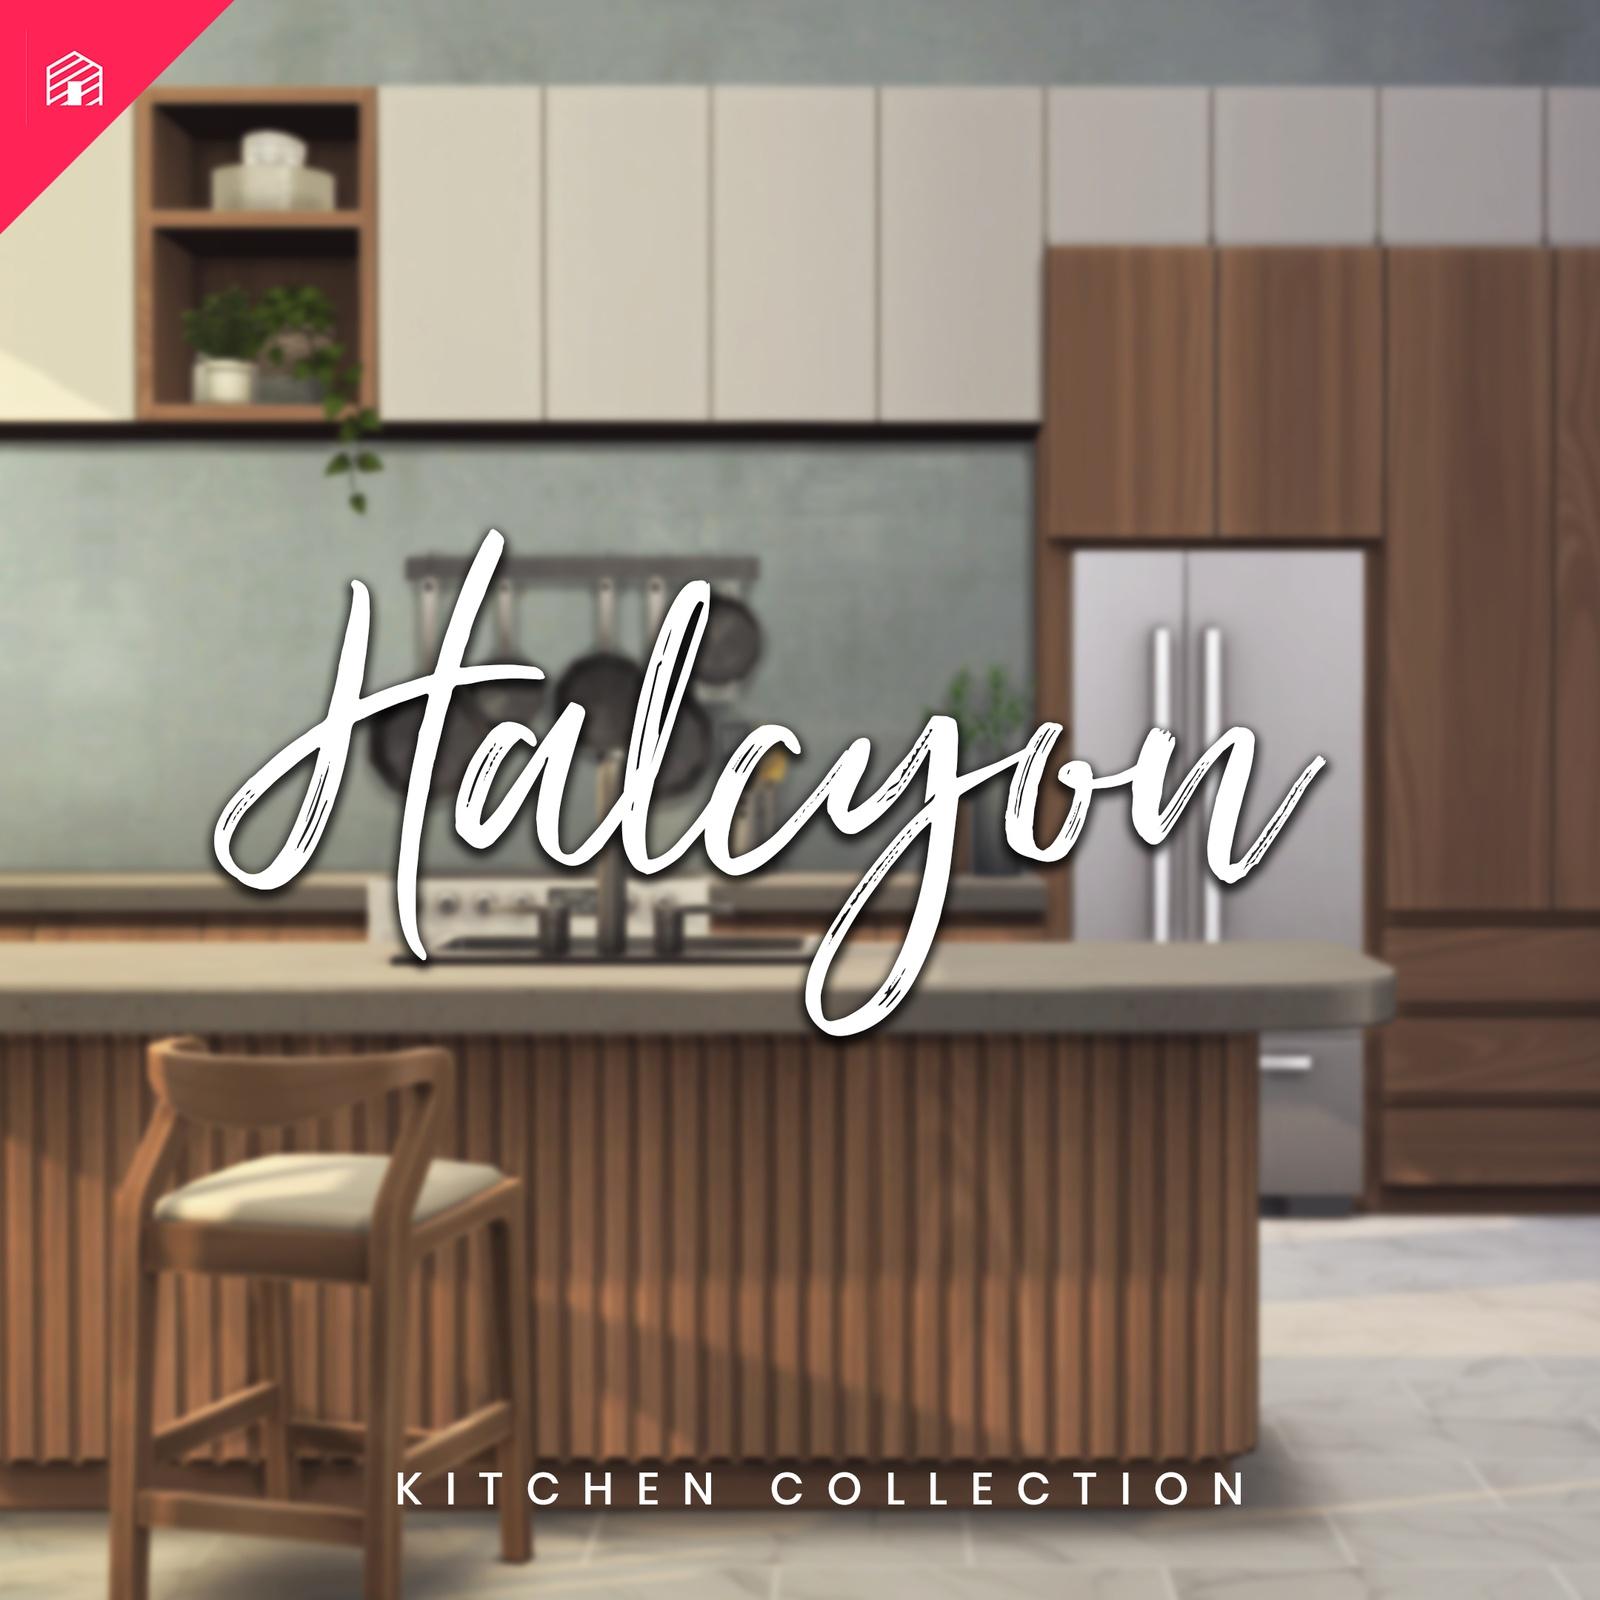 halycon kitchen the complete collection harrie